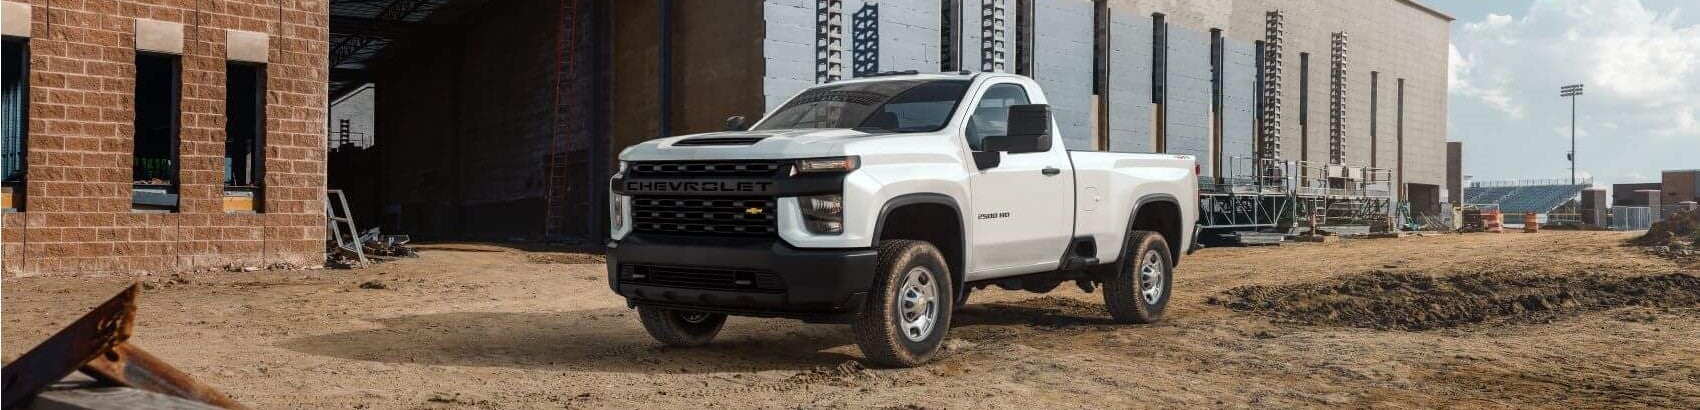 2022 Chevy 2500 Snipped